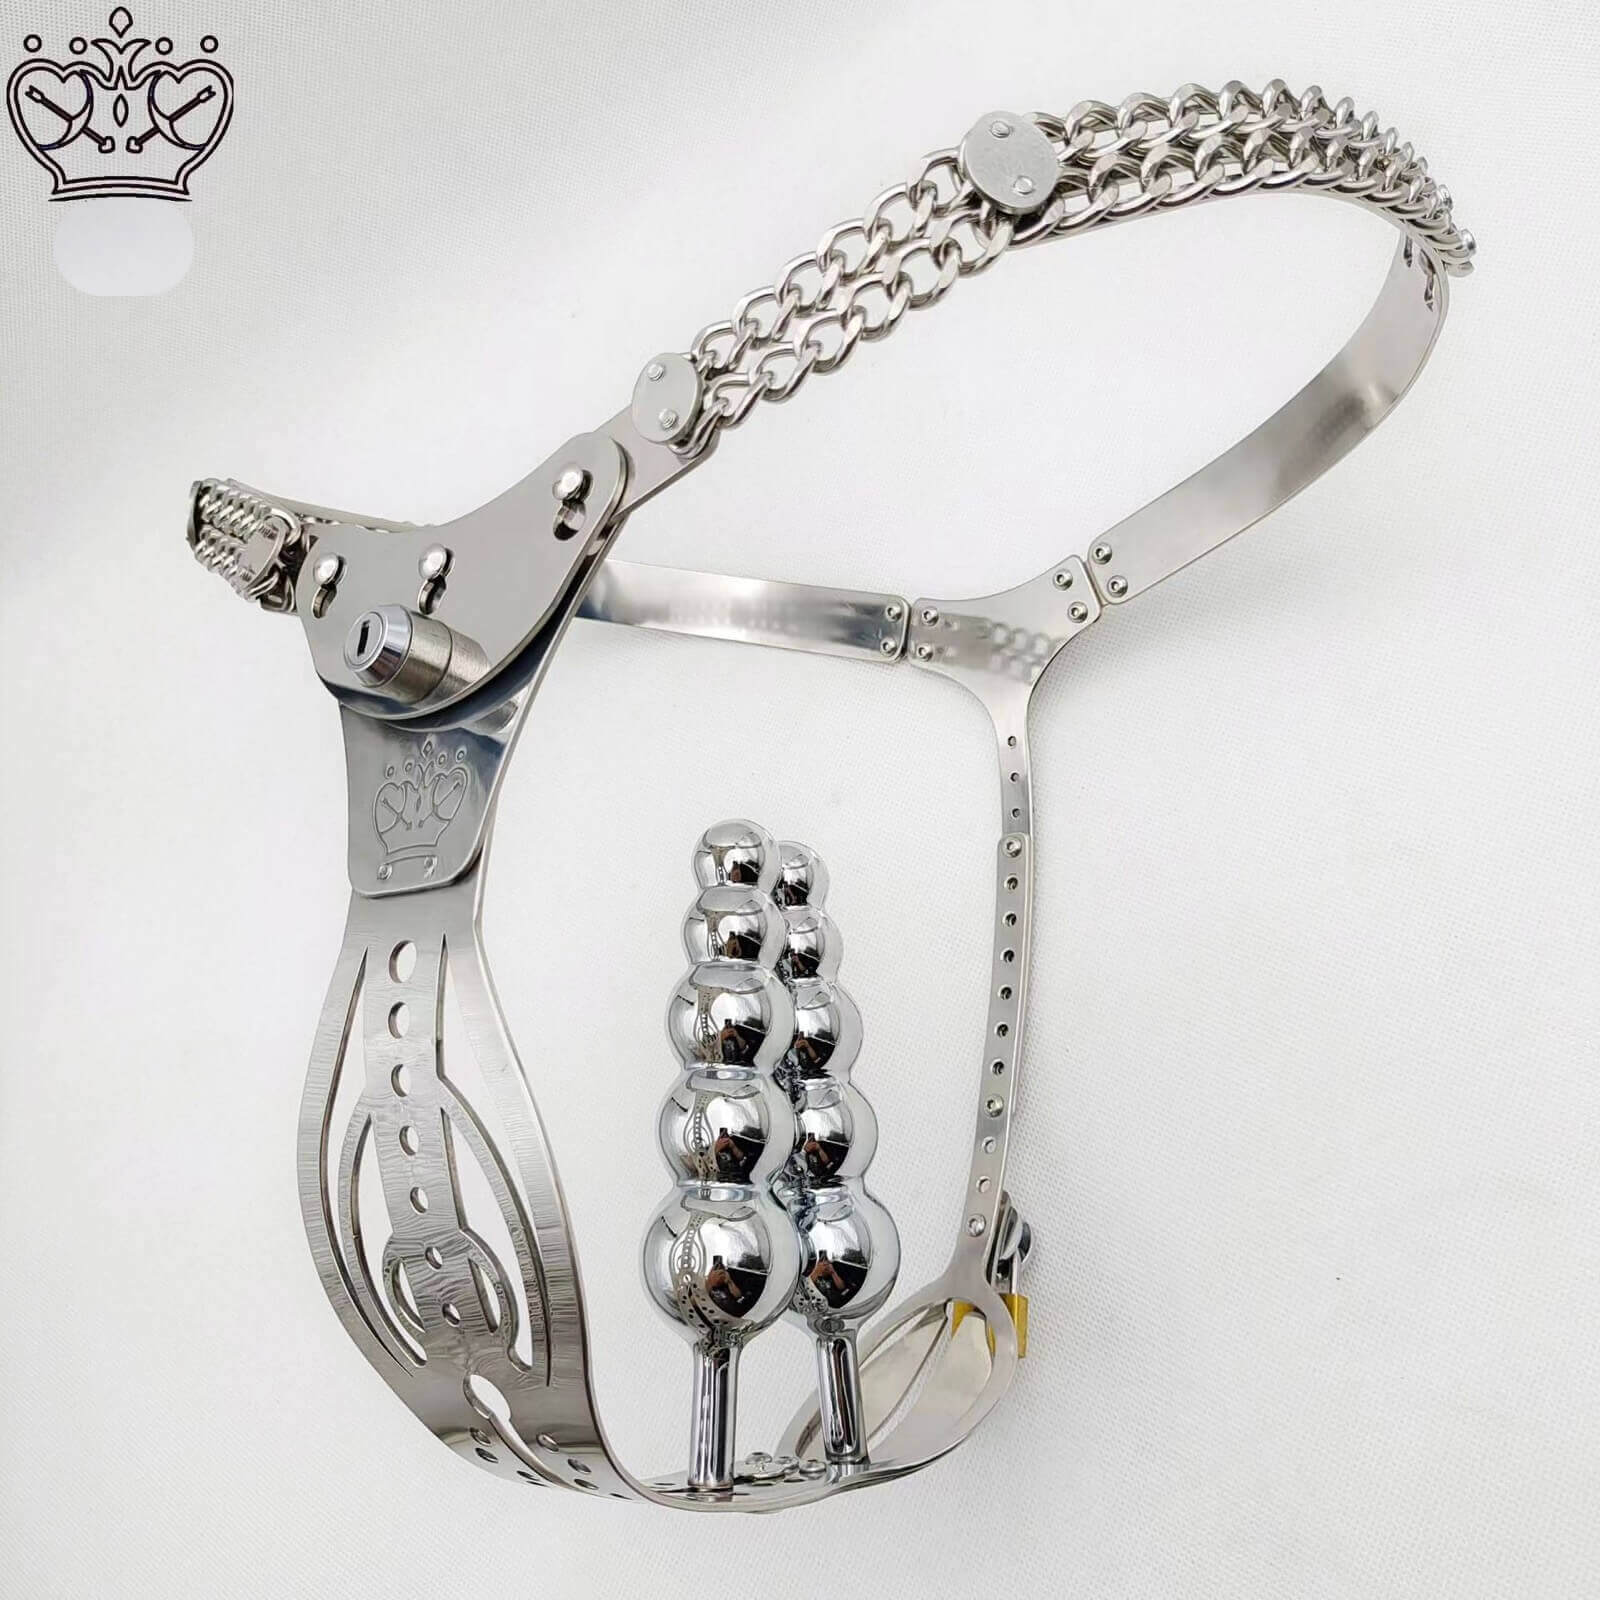 Stainless Steel 2.0 Hollowed Out Adjustable Chastity Belt For Female ...